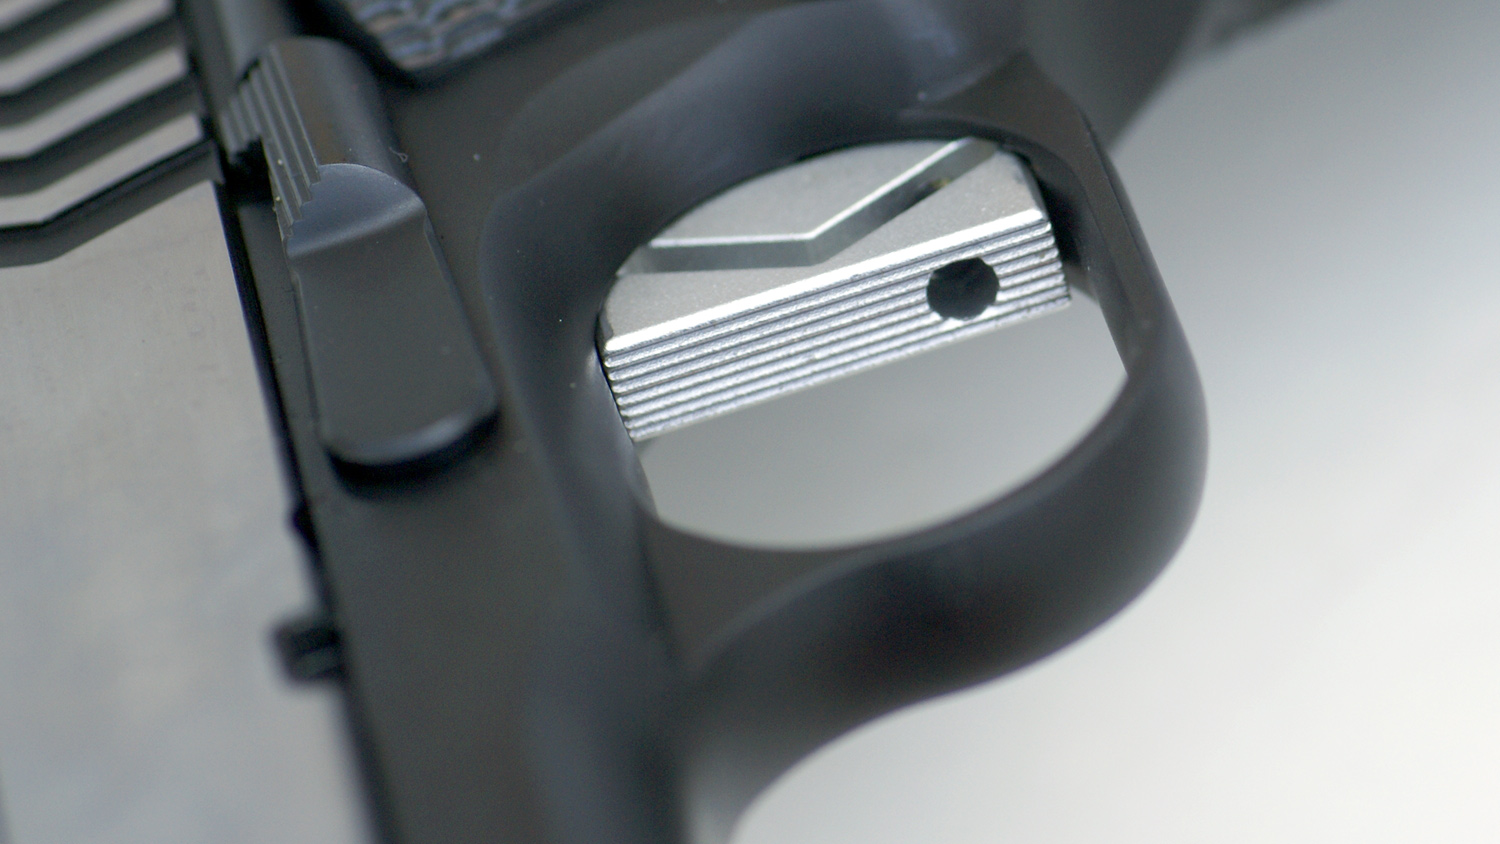 The flat-faced aluminum trigger includes an overtravel adjustment screw and broke at just over four pounds out of the box.